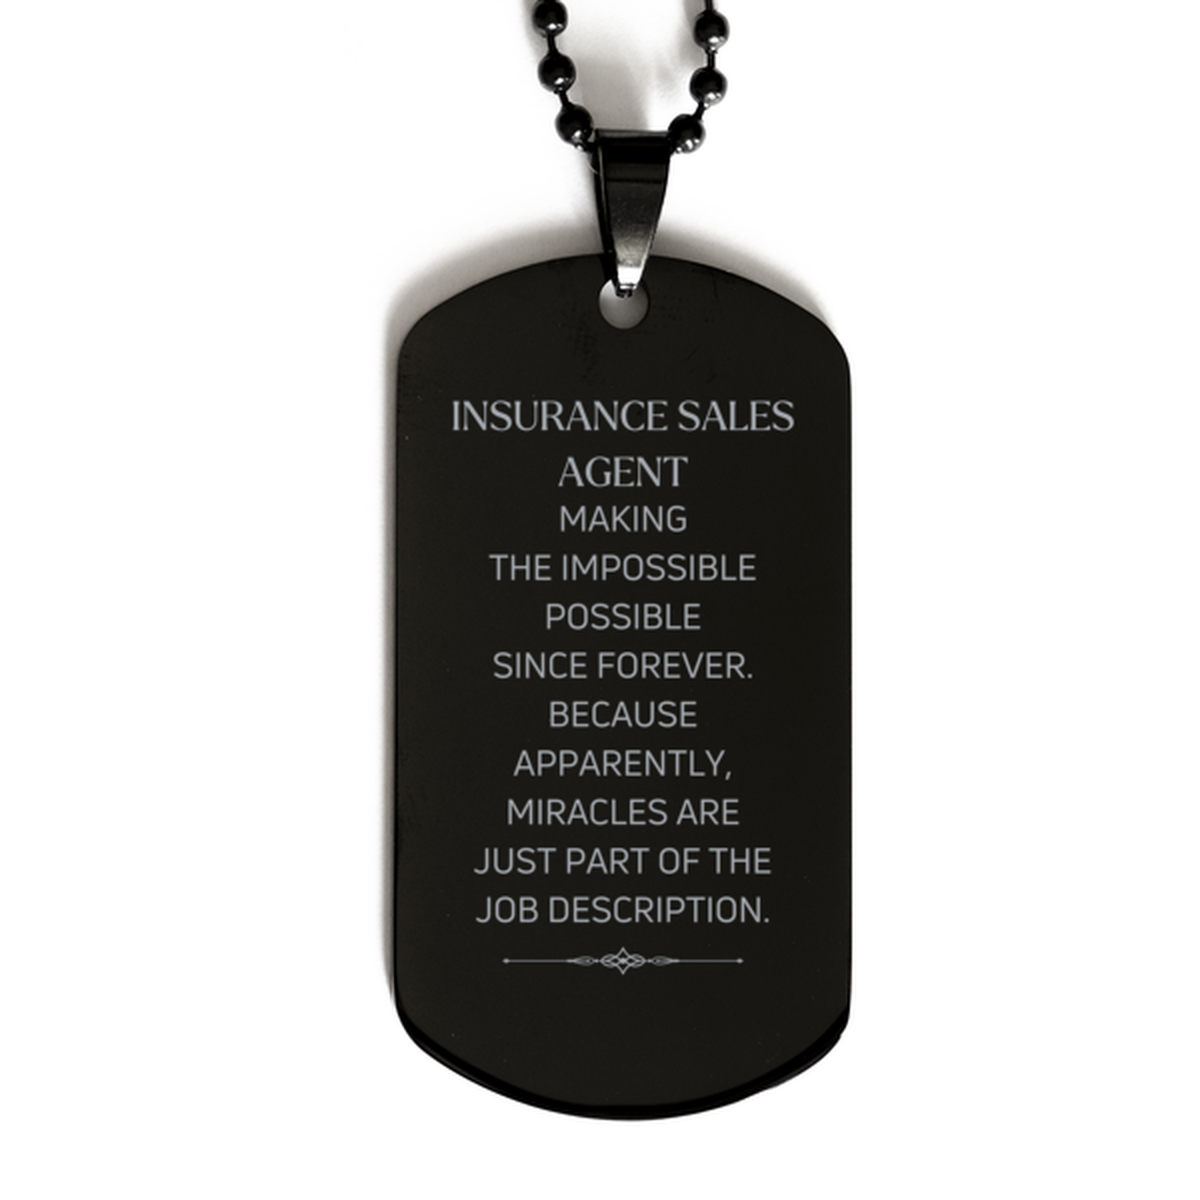 Funny Insurance Sales Agent Gifts, Miracles are just part of the job description, Inspirational Birthday Black Dog Tag For Insurance Sales Agent, Men, Women, Coworkers, Friends, Boss